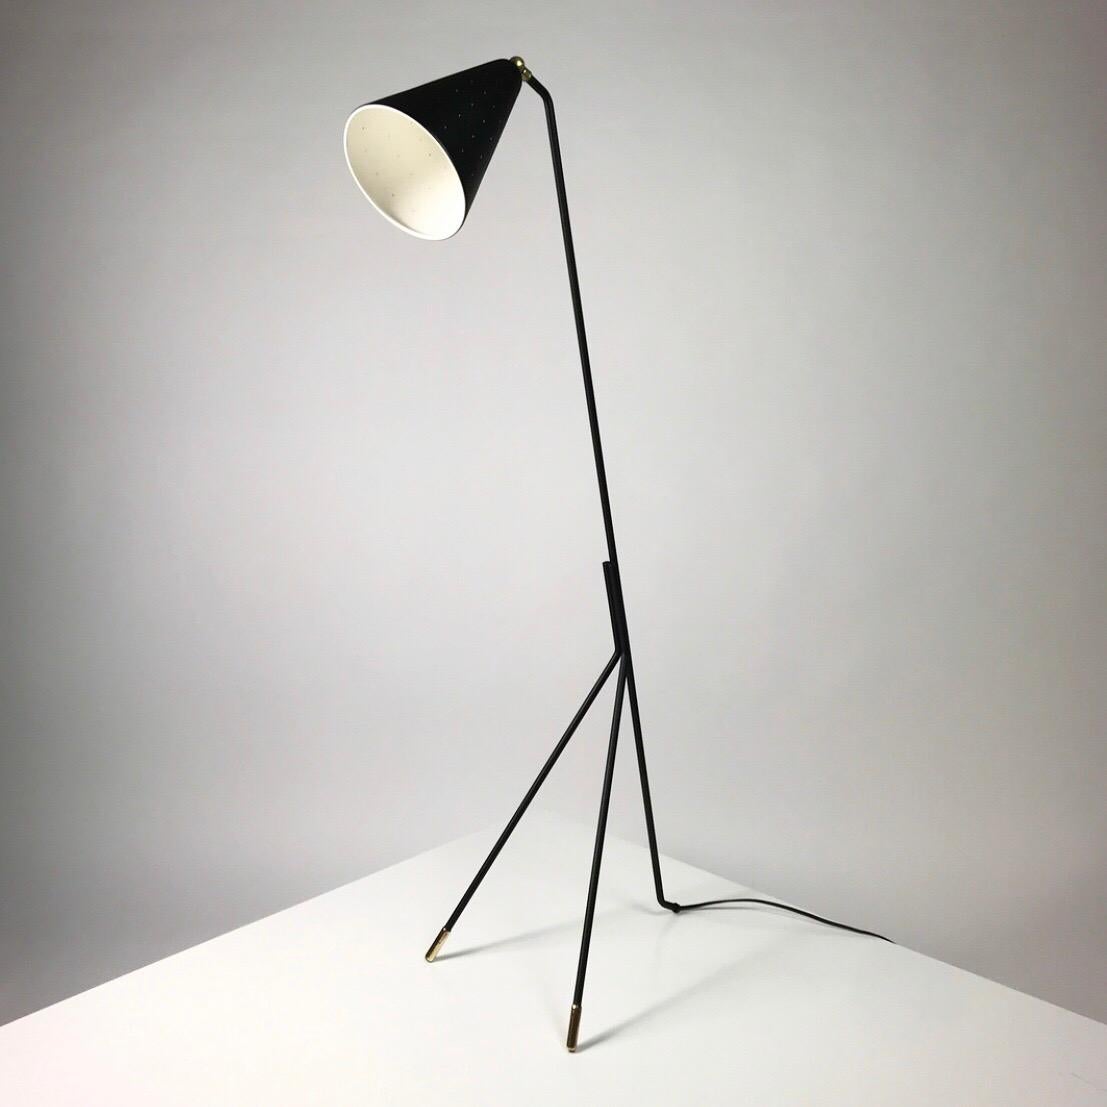 Svend Aage Holm Sørensen is one of Denmarks most productive lighting designers of all times. Ranging from the late 1940s to start 1990s. 

This rare floor lamp is a good example of the 1950s design period in Scandinavia which also indicates the